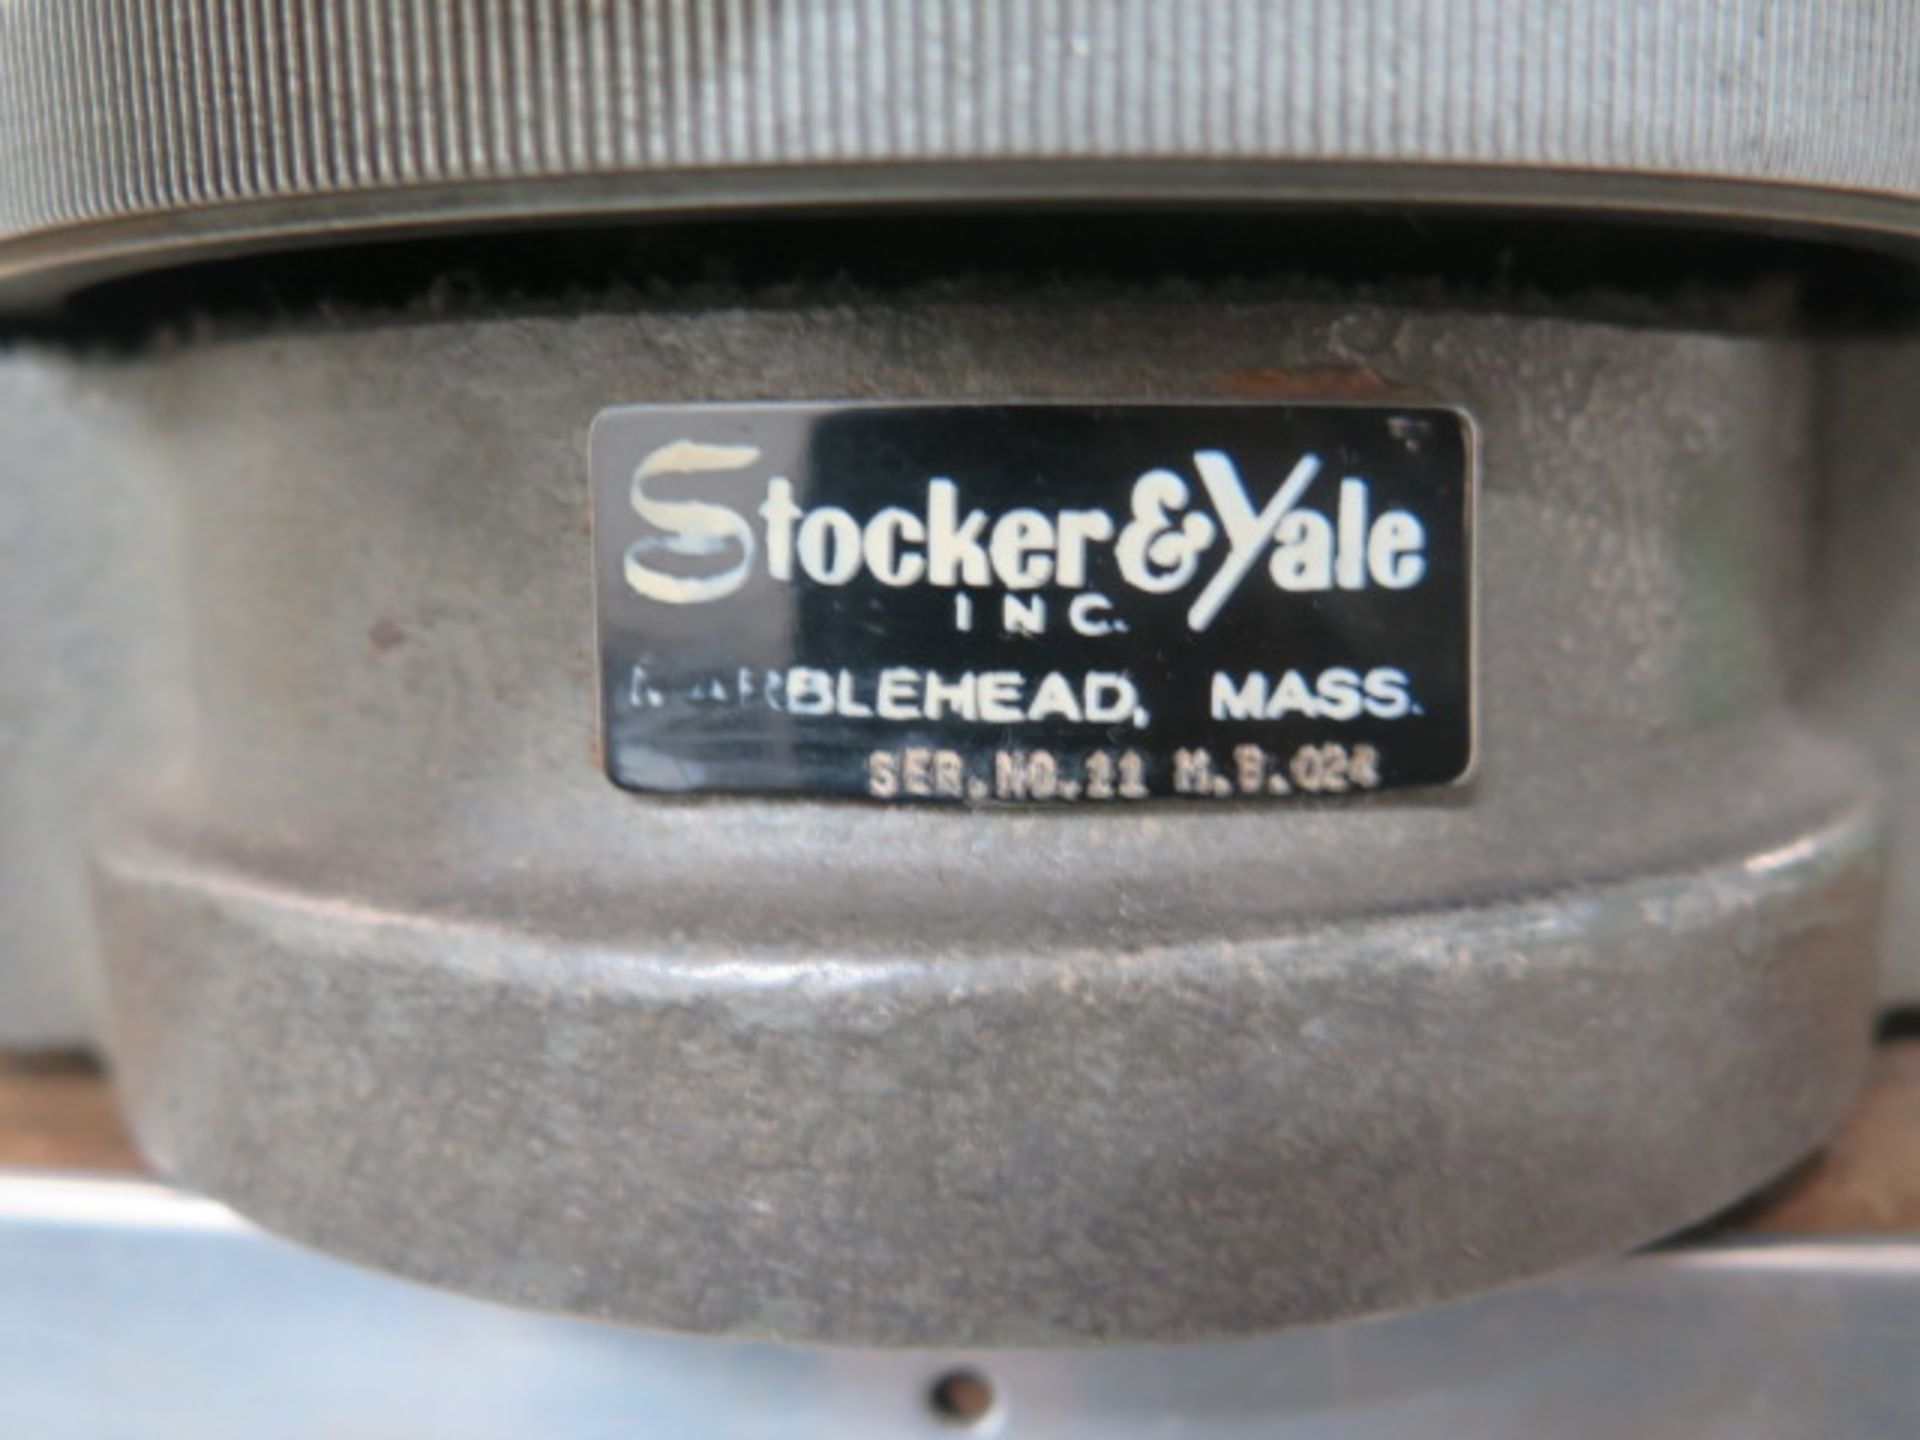 Stocker & Yale Optical Measuring Machine s/n 11 M.B.024 (SOLD AS-IS - NO WARRANTY) - Image 8 of 8